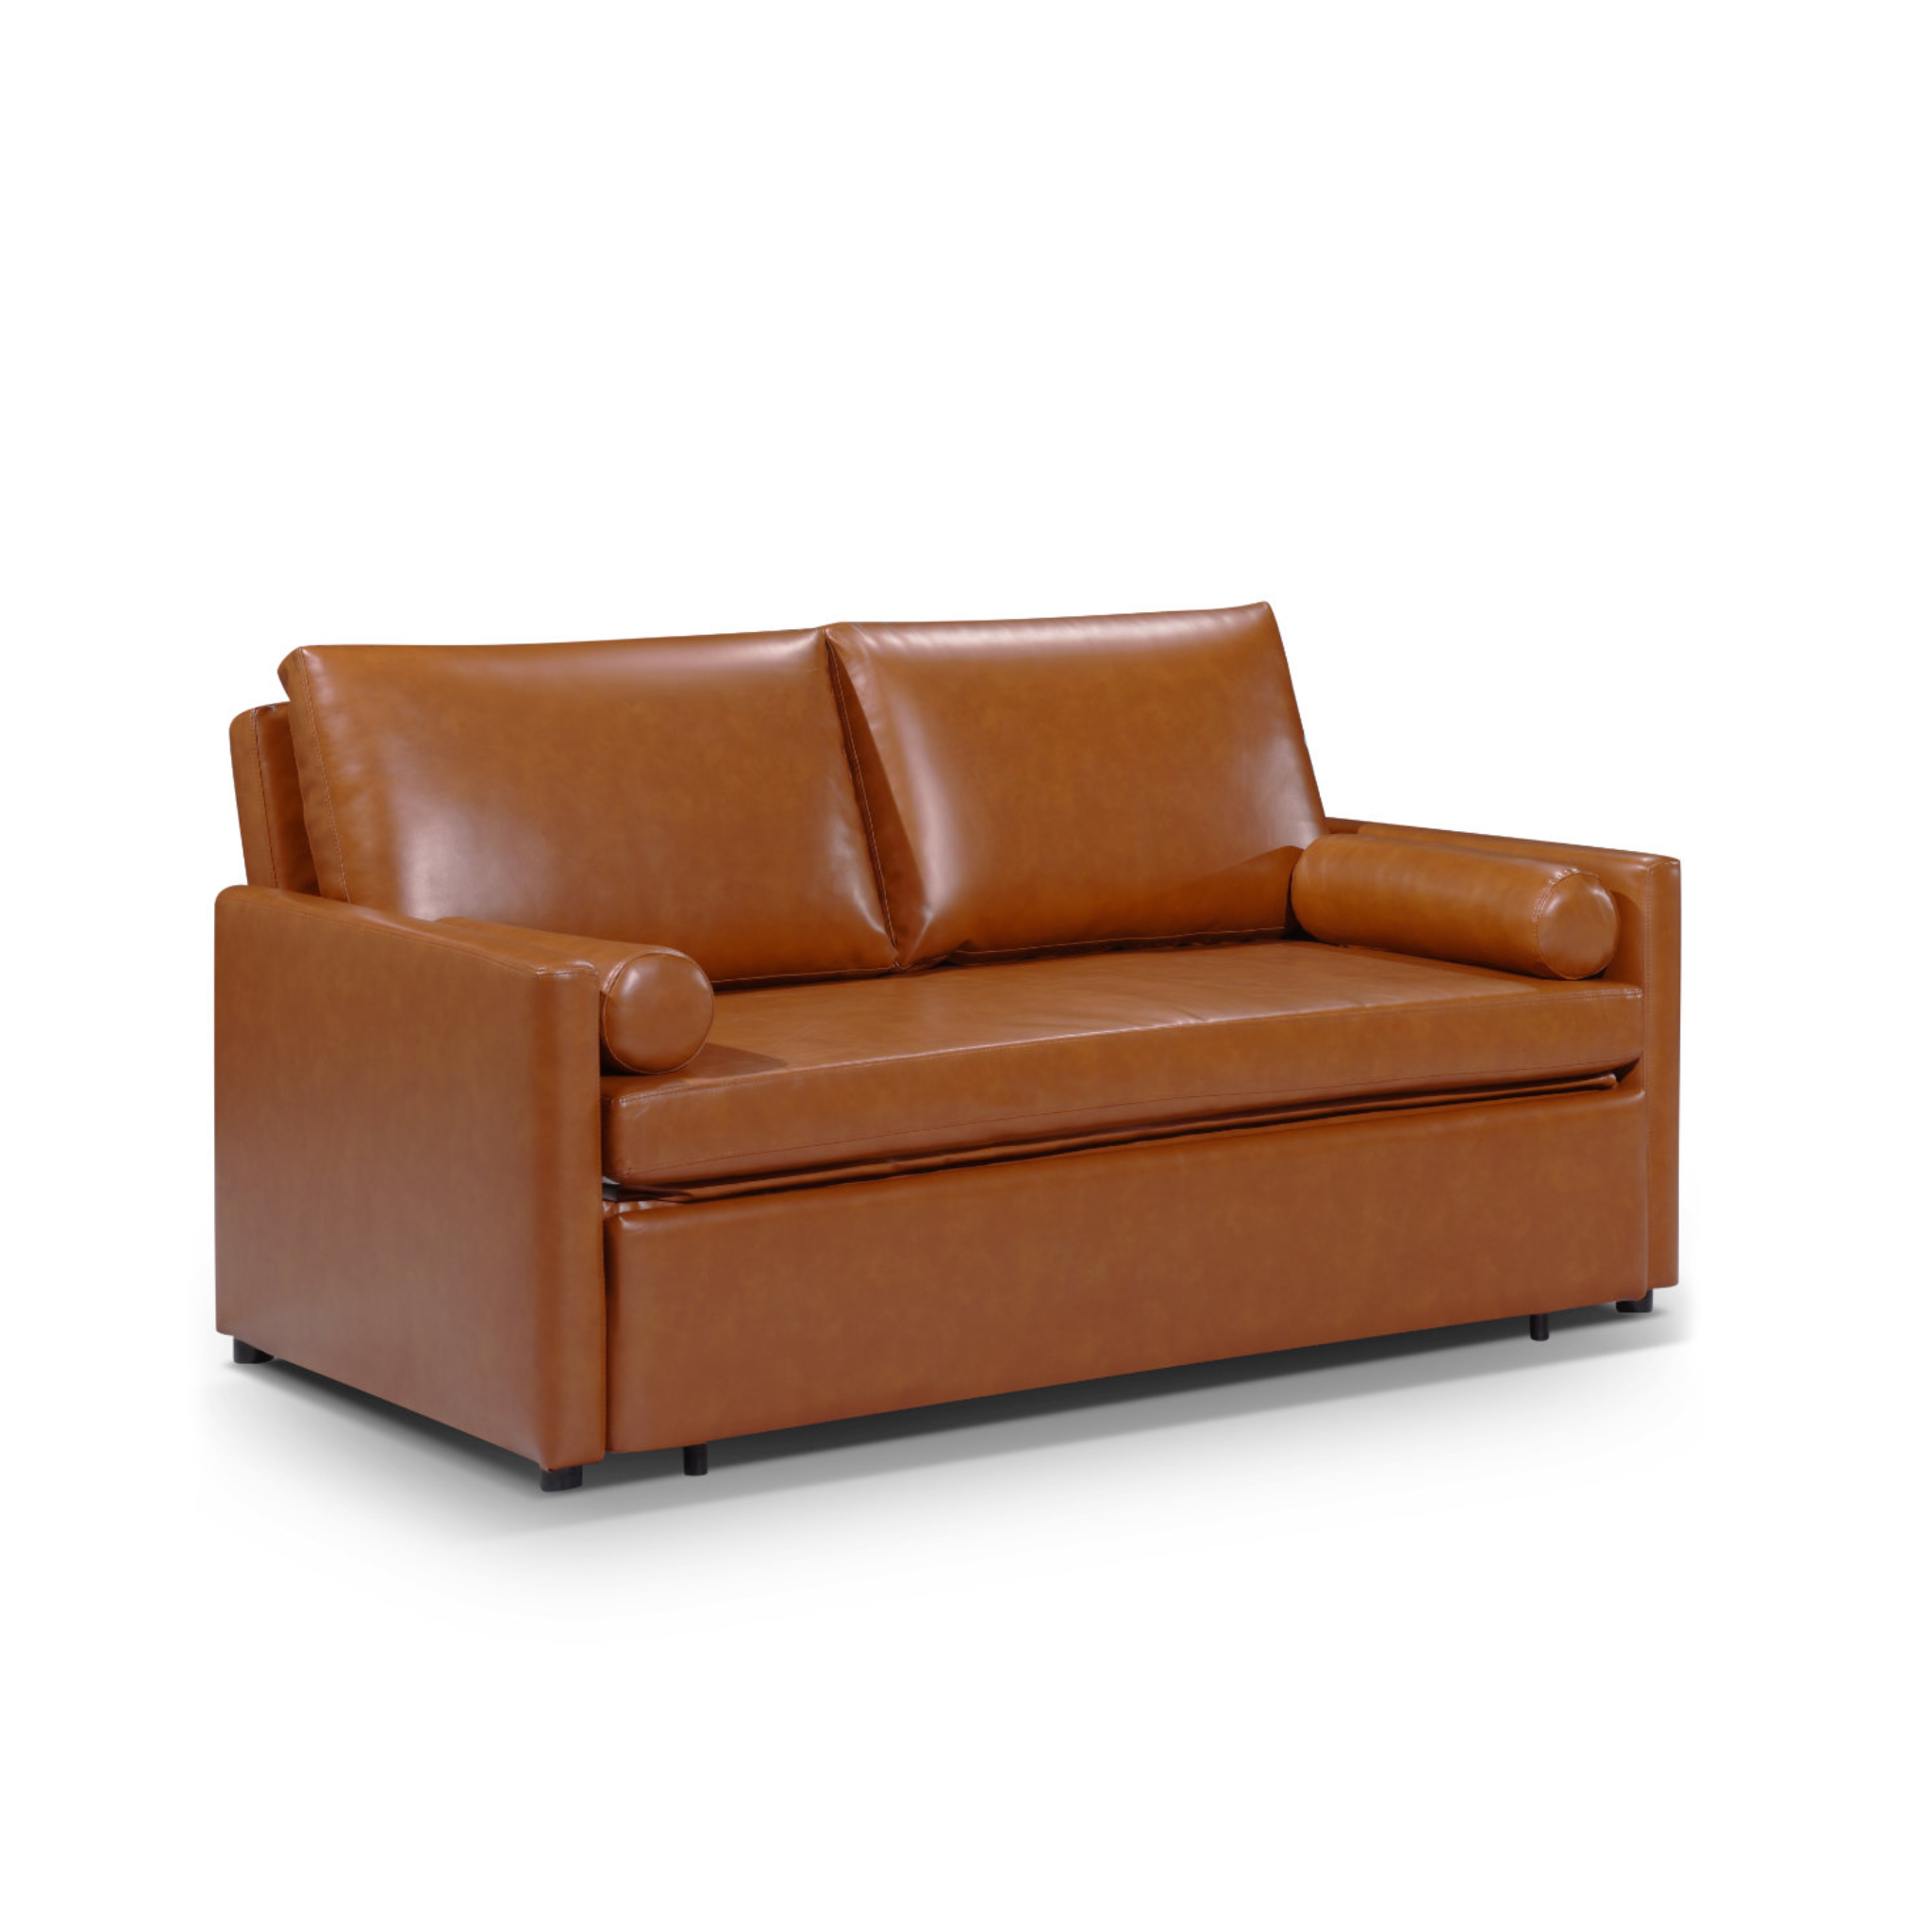 Harmony Sofa Bed Queen Eco Leather, Leather Bed Sofa